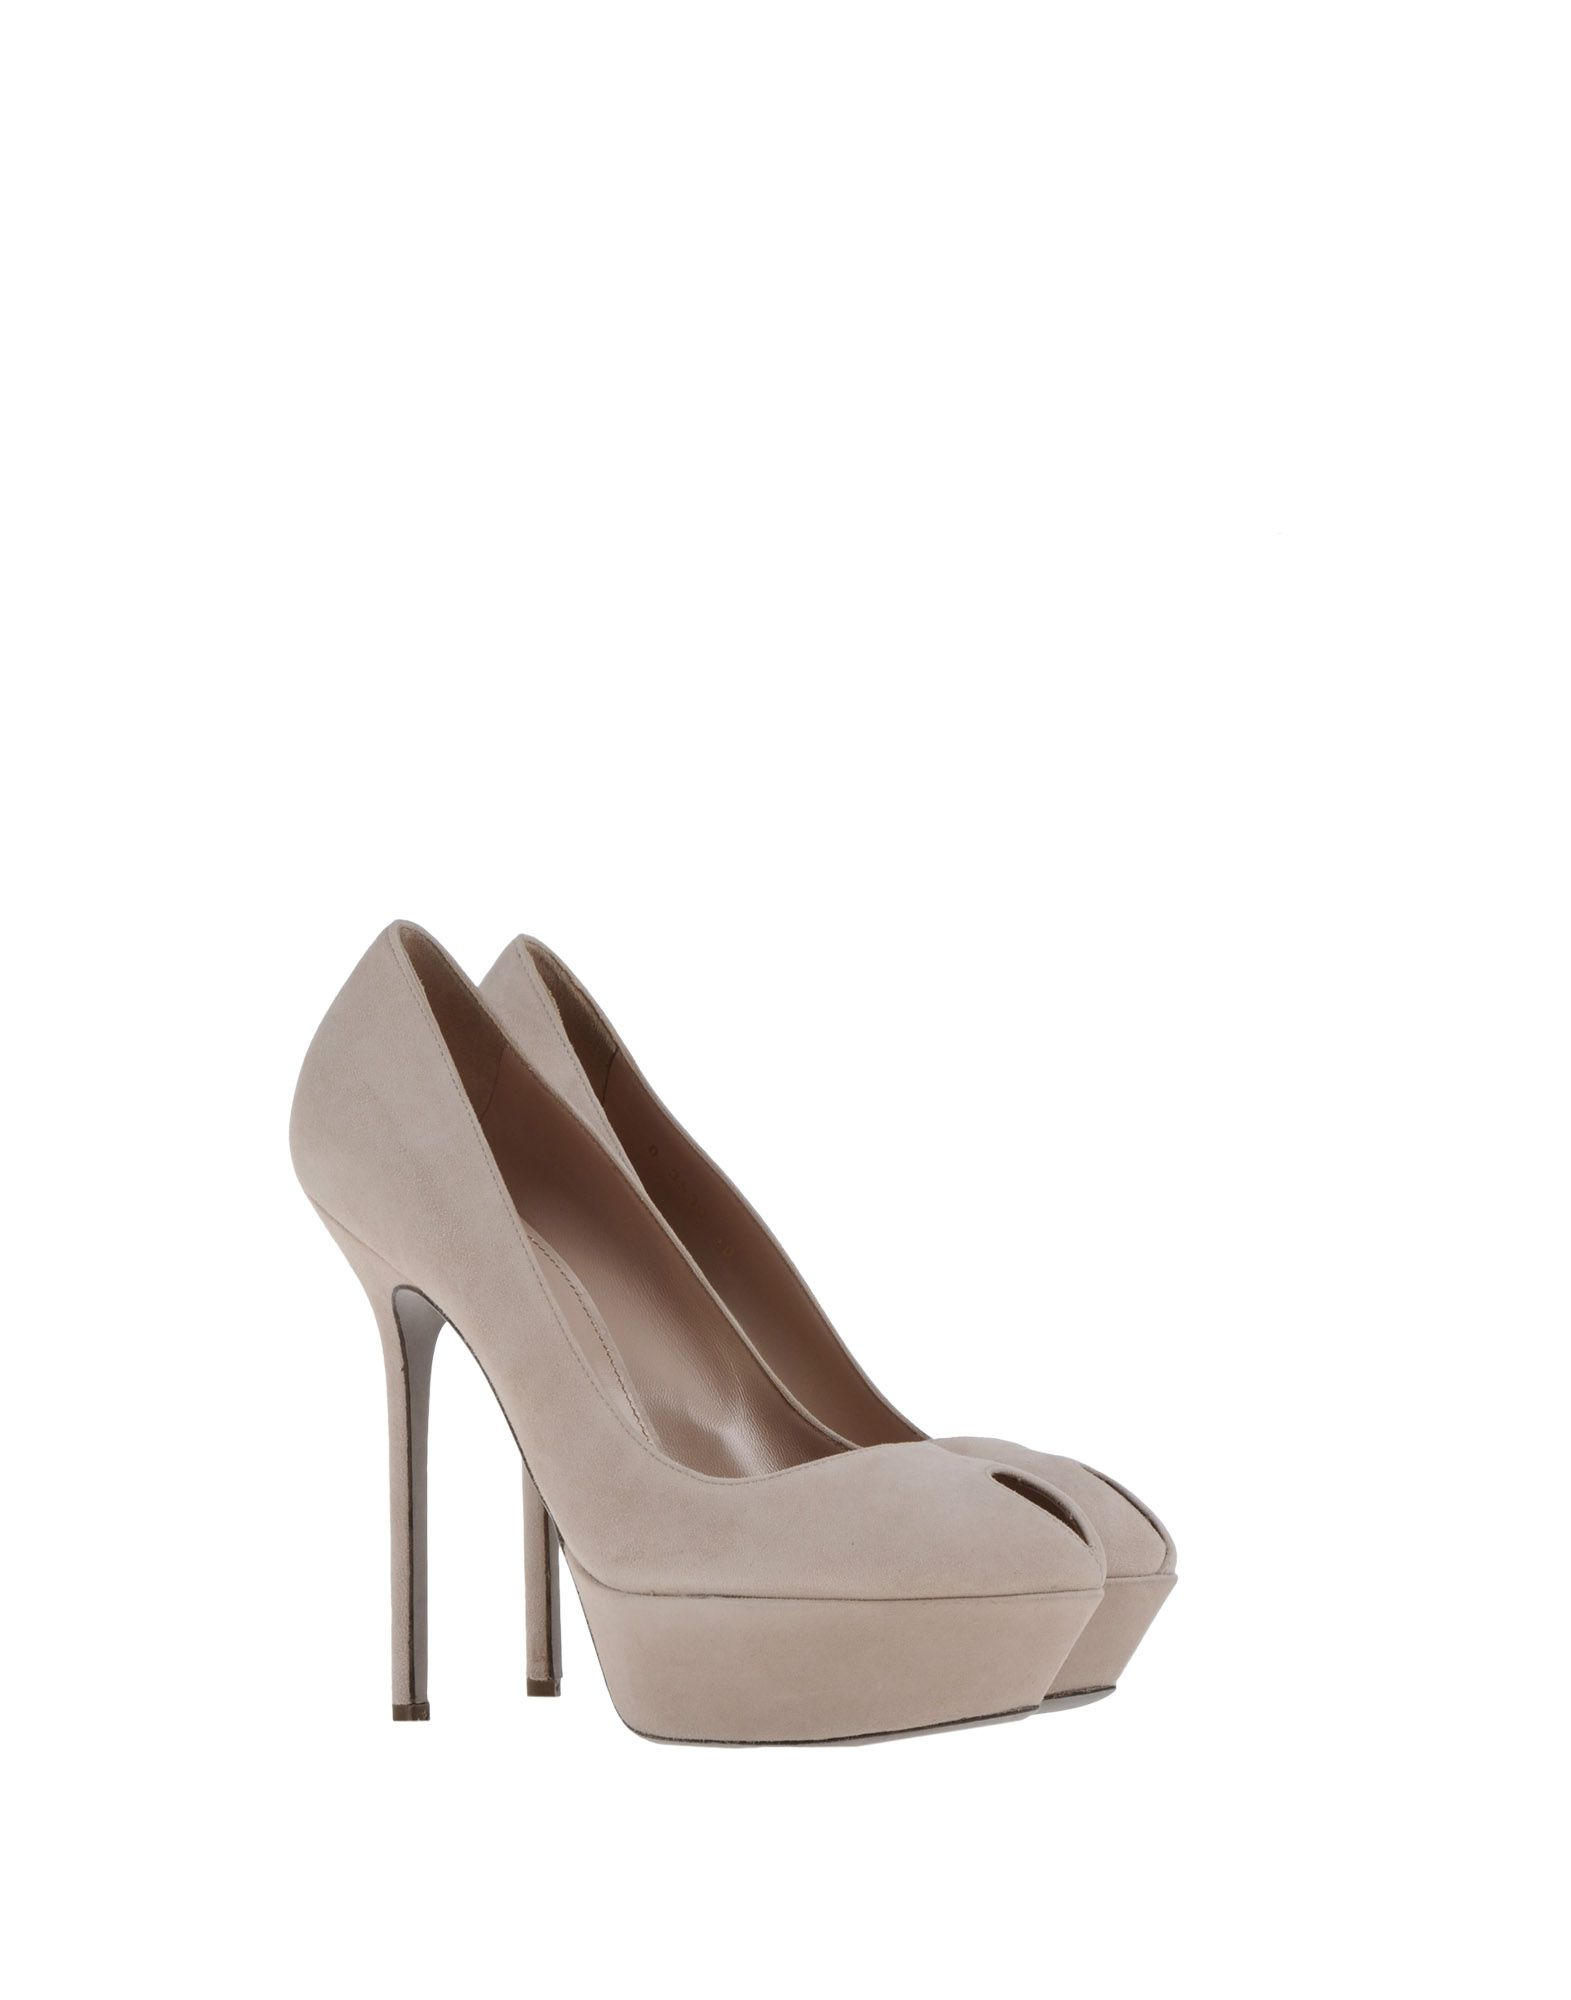 Sergio Rossi Pumps with Open Toe in Gray (Light grey) | Lyst